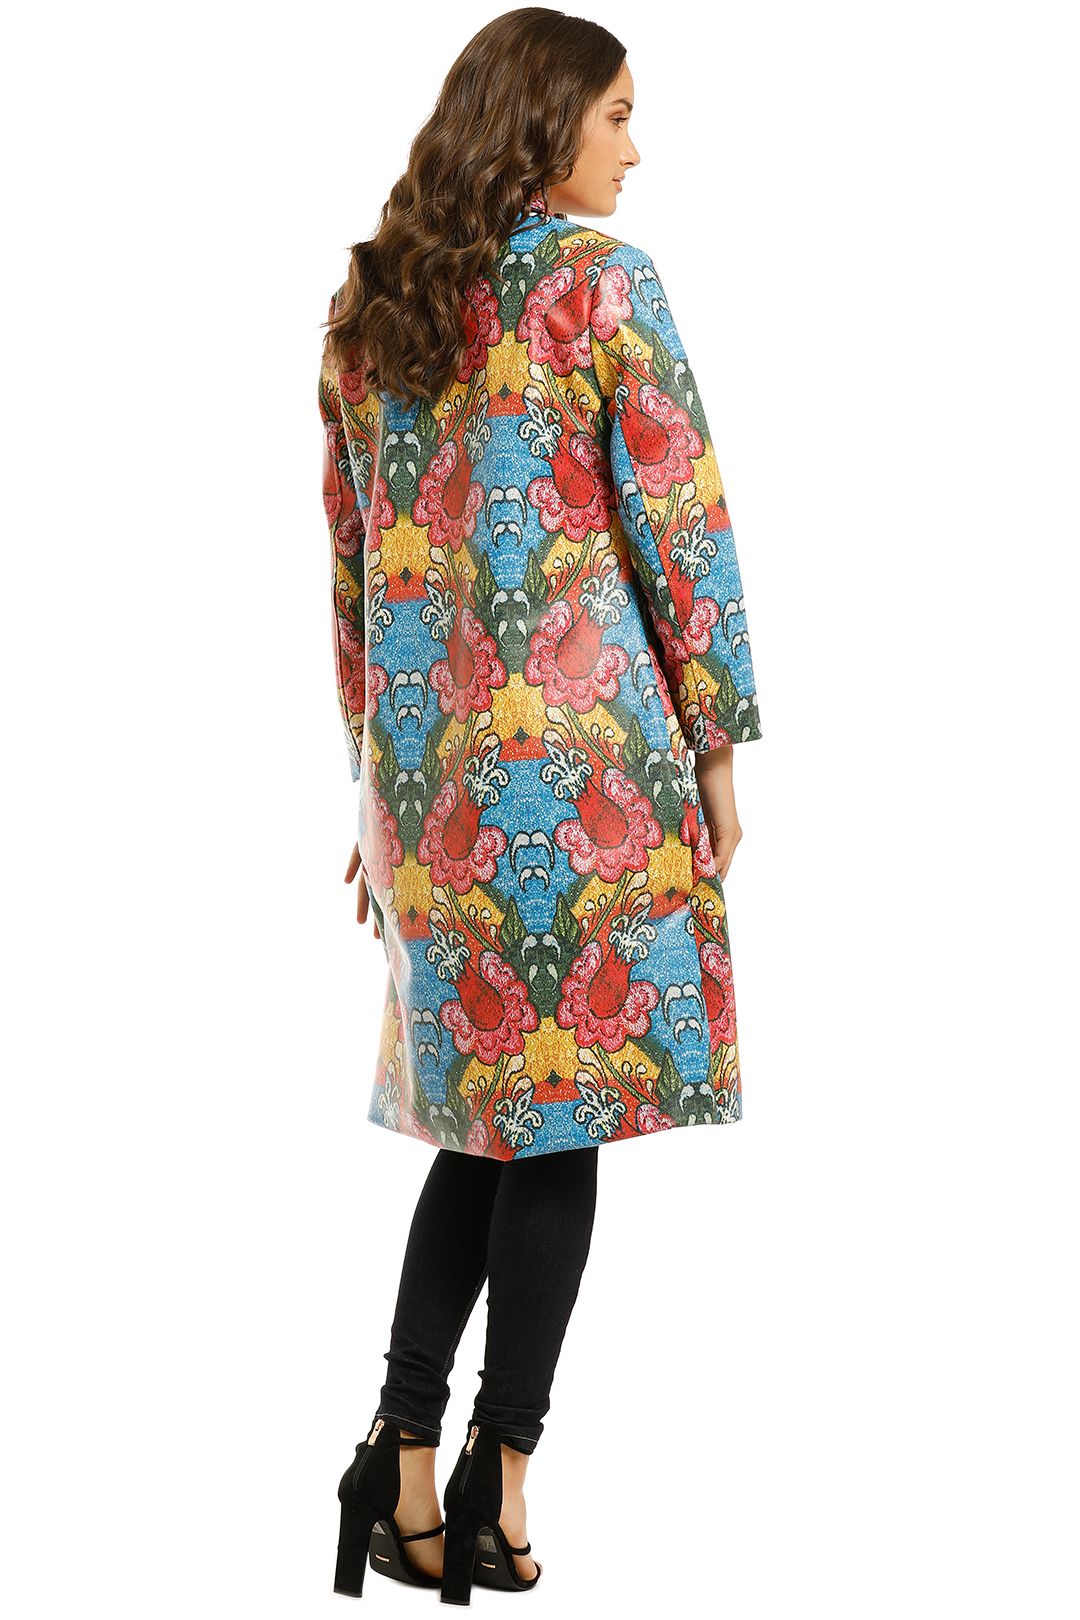 Curate-by-Trelise-Cooper-Warm-Again-Coat-Floral-Back